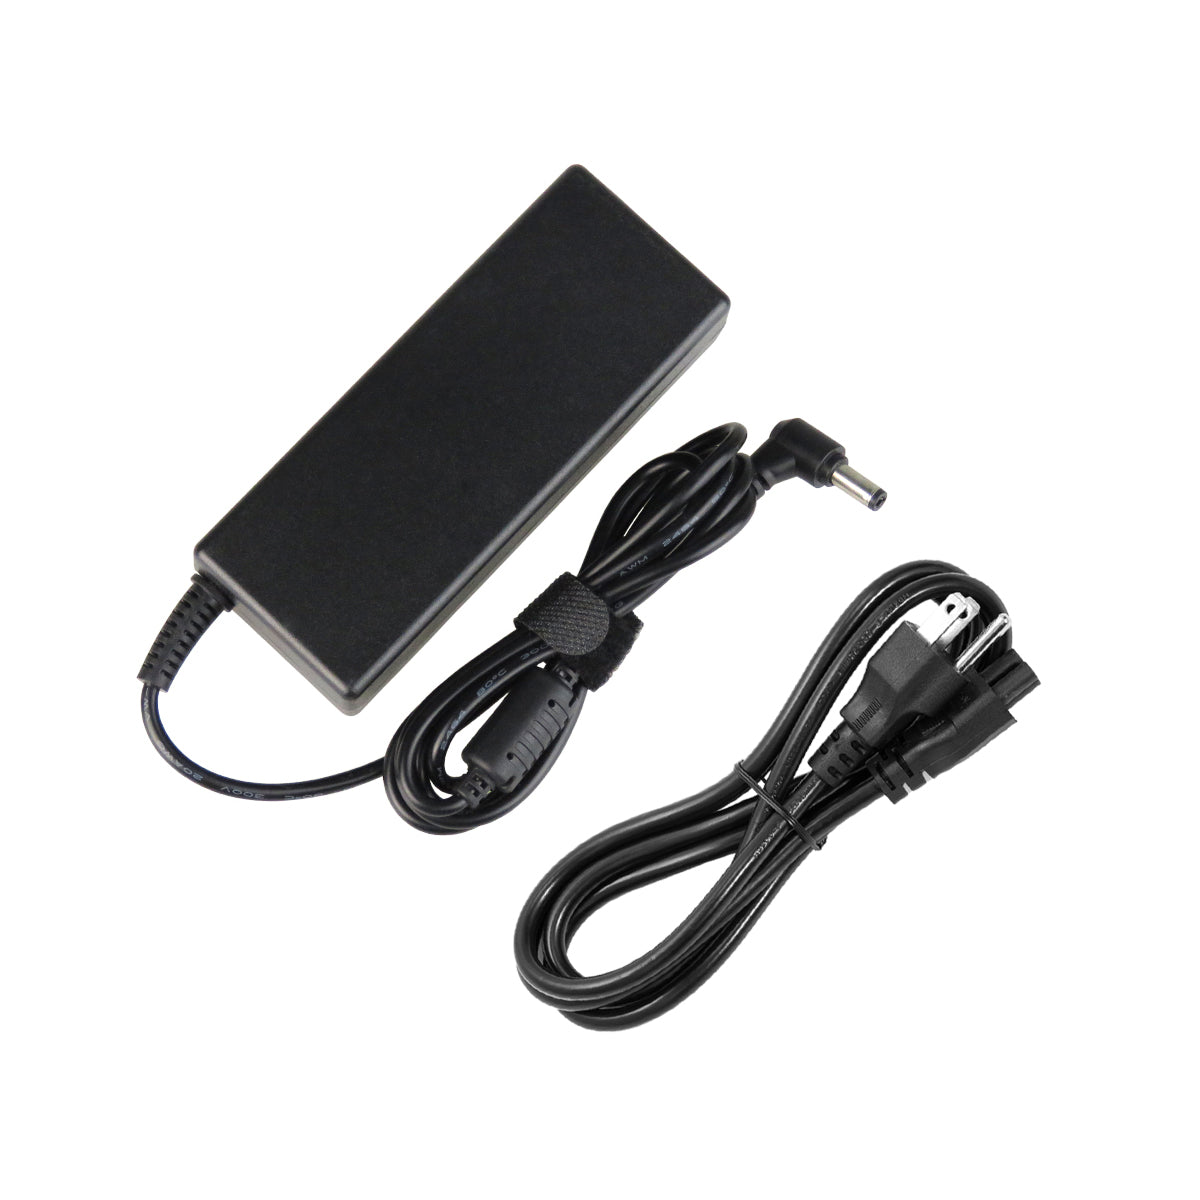 AC Adapter Charger for ASUS N46VZ Notebook.